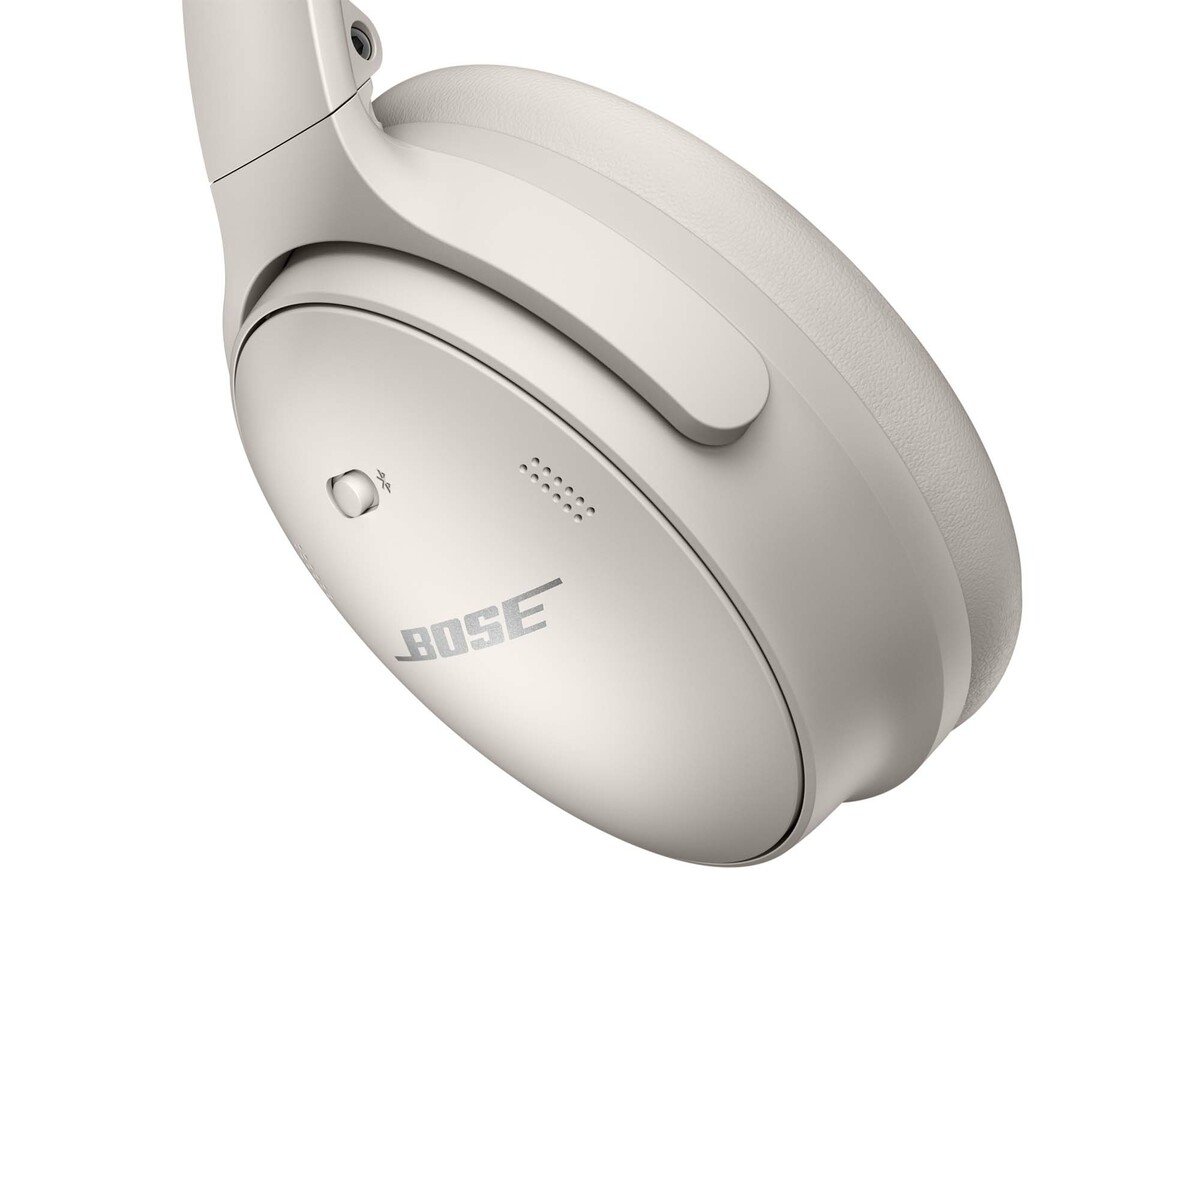 Bose QuietComfort 35 vs. Bose QuietComfort 45: What's The Real Difference?  - History-Computer